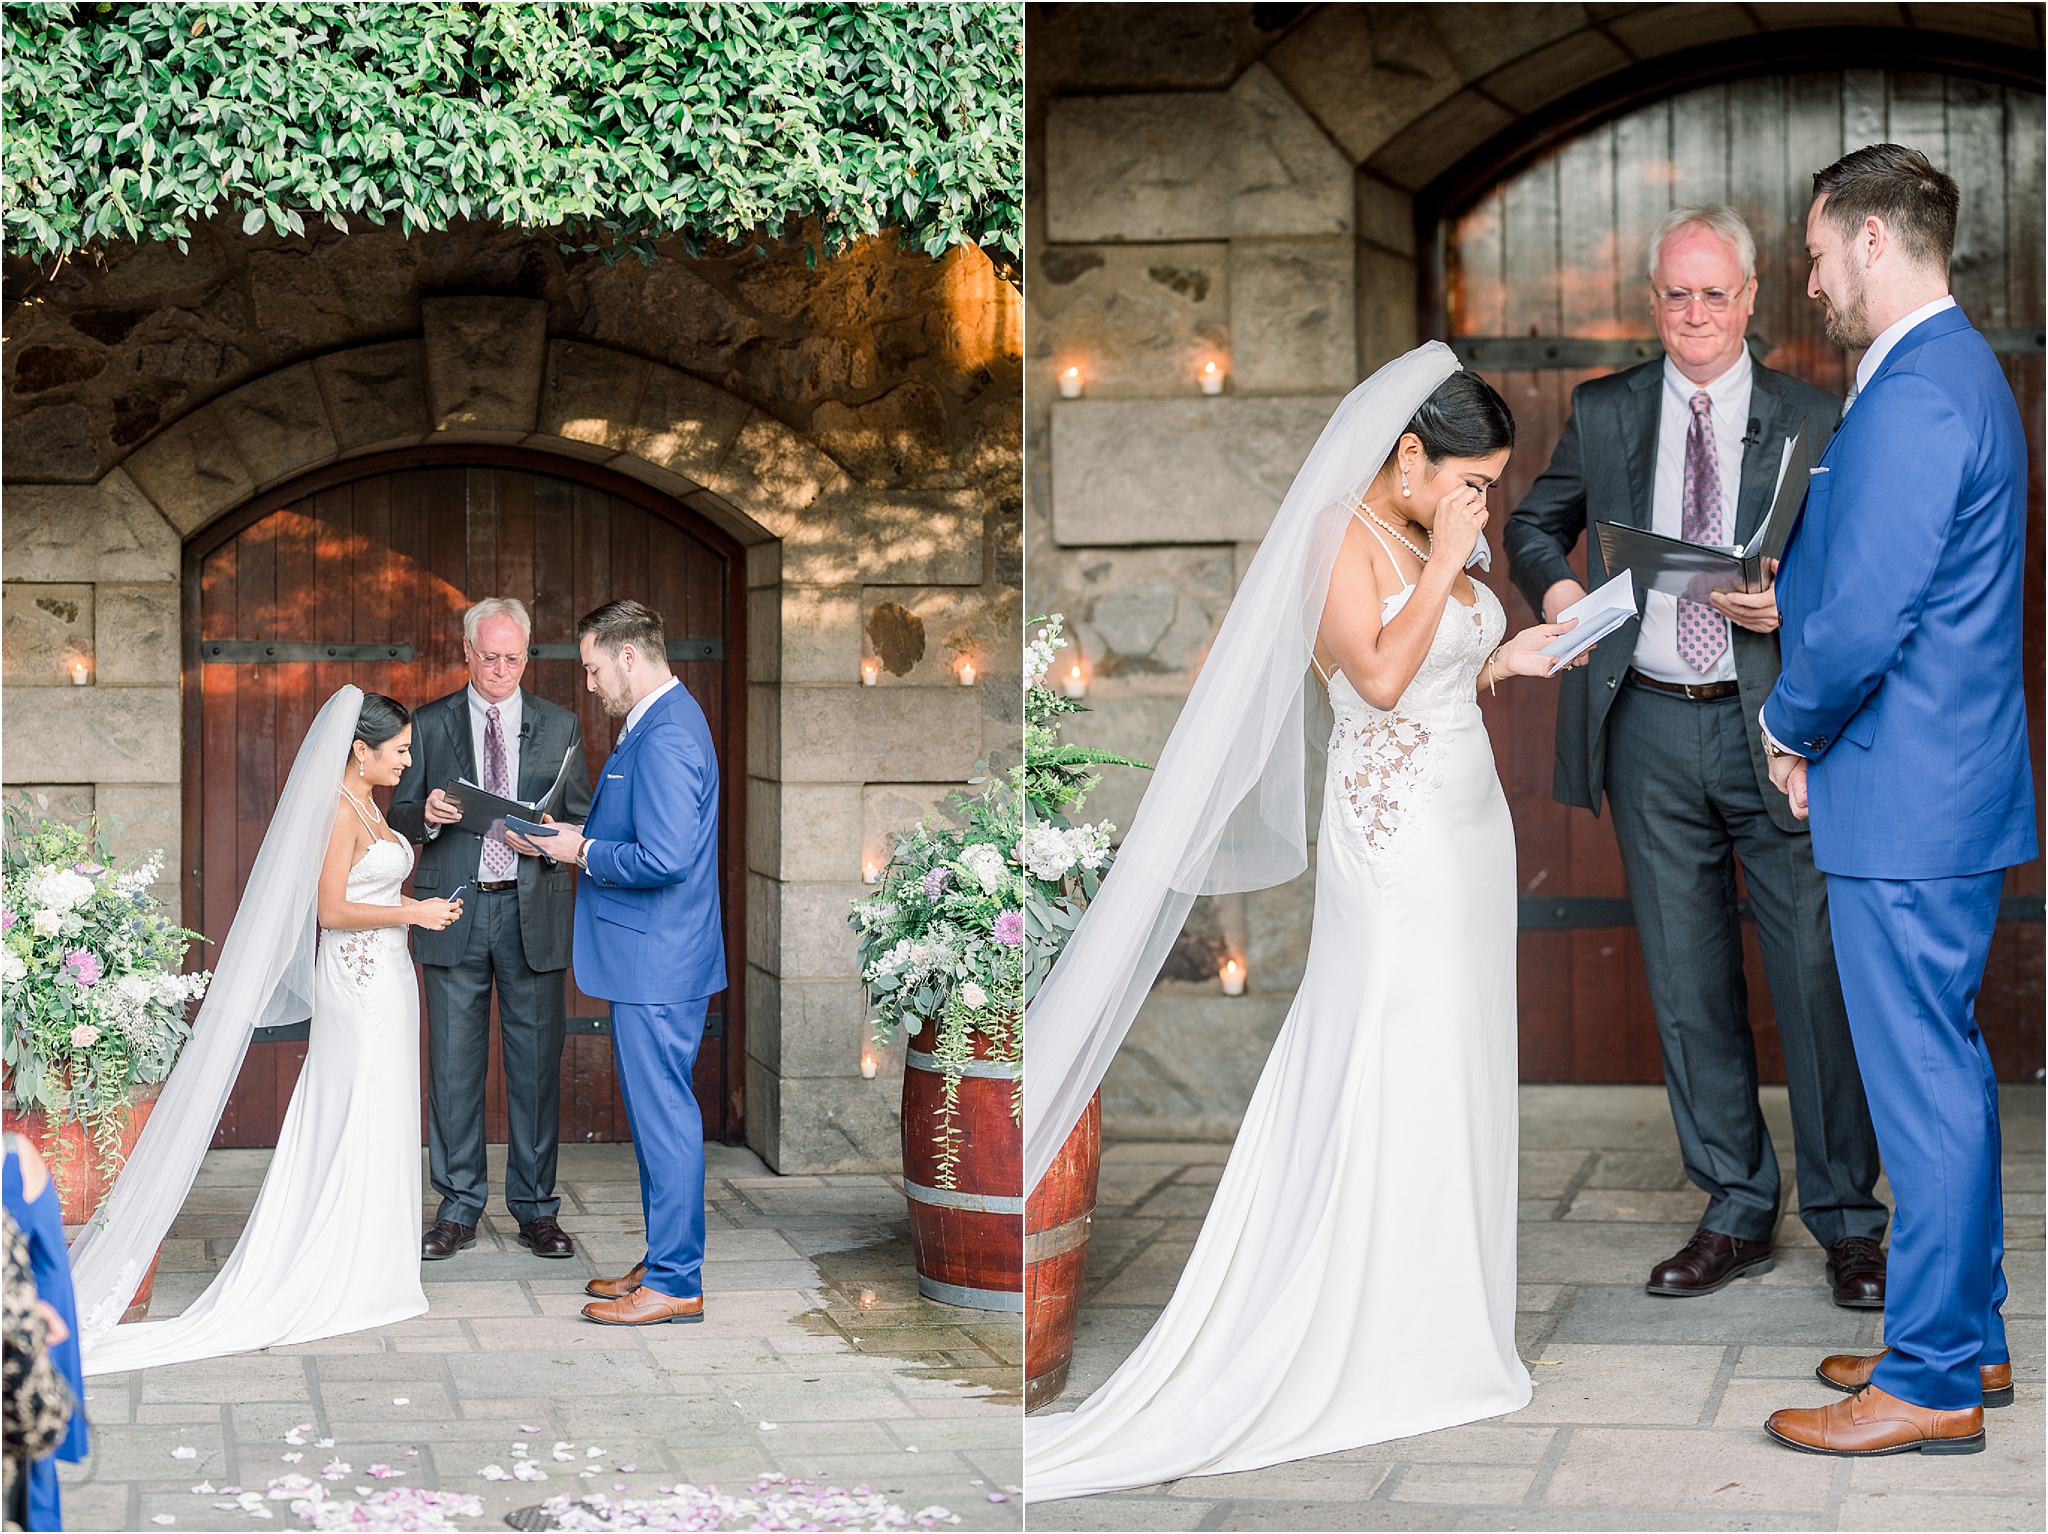 V. Sattui Winery Wedding | Napa Valley, CA | Annie and Pablo ceremony photos | Napa Valley Wedding Photographer | West End Photography